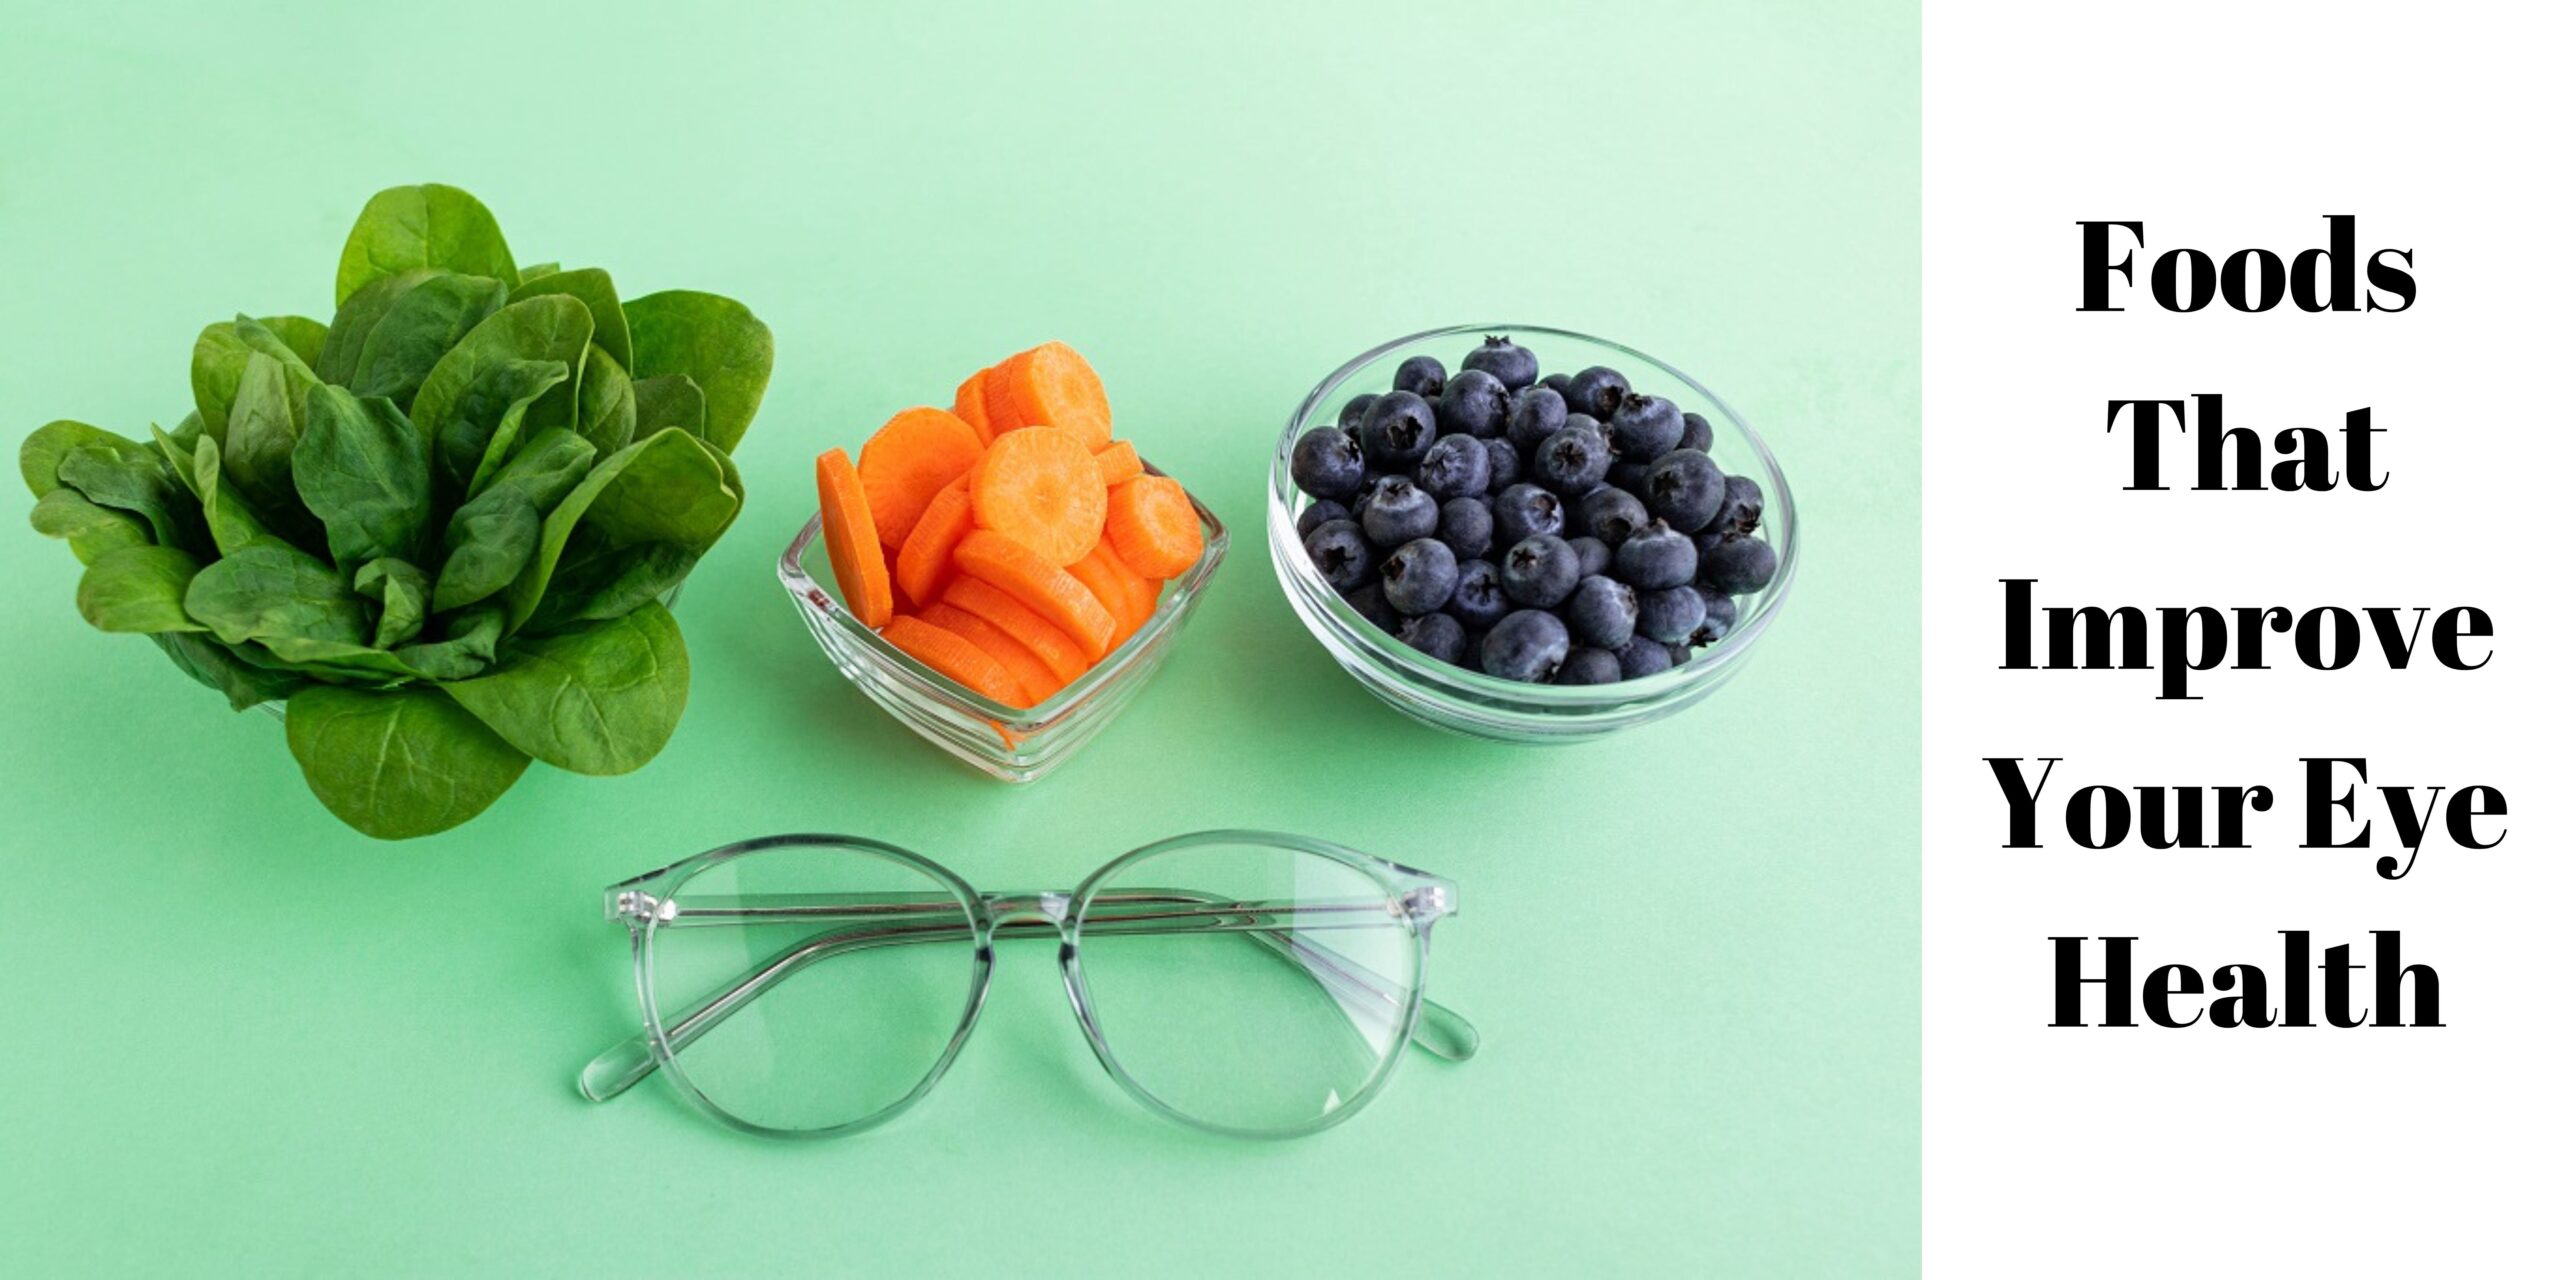 Foods That Improve Your Eye Health